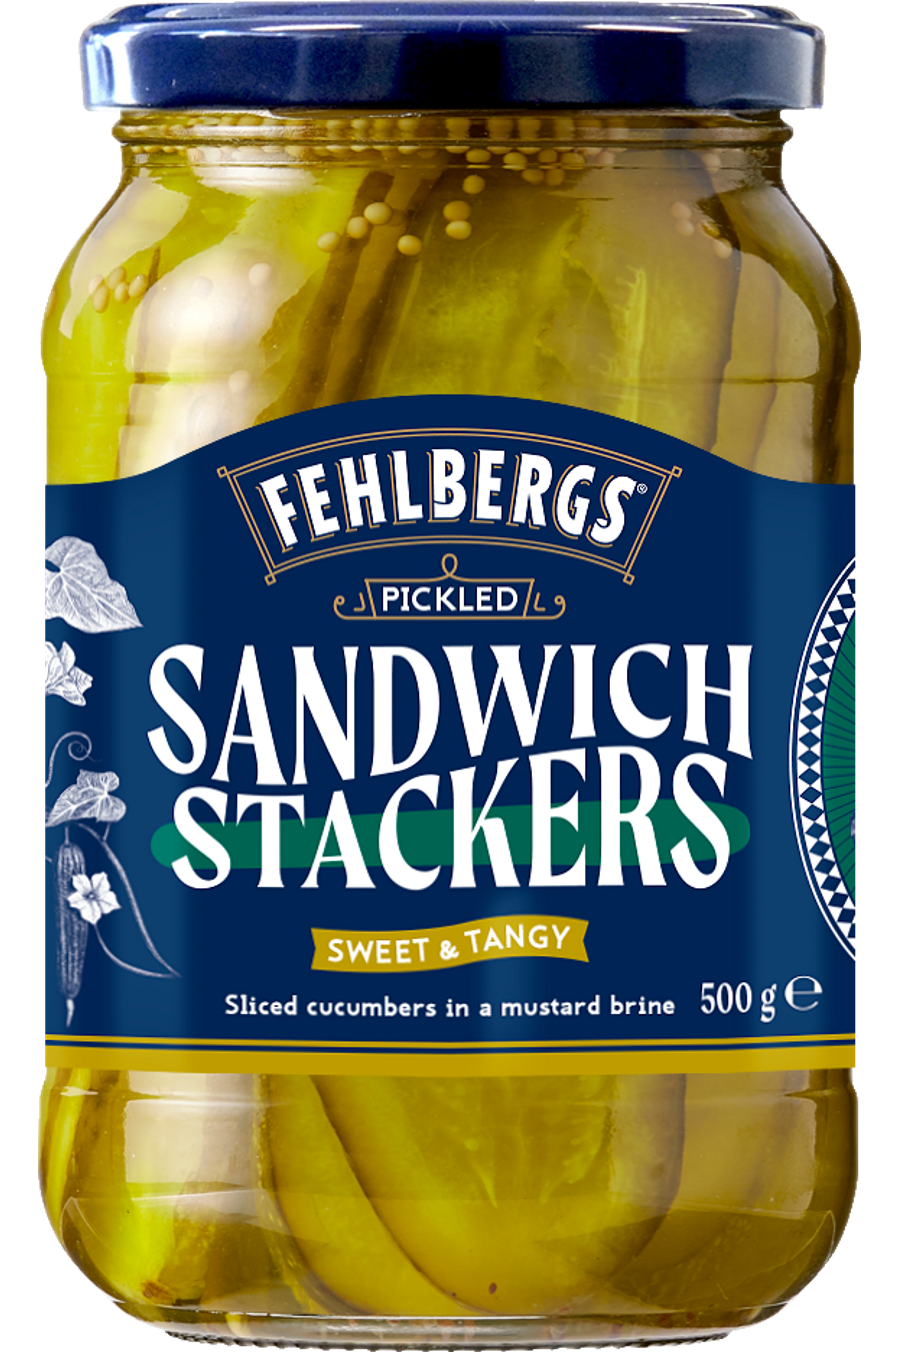 https://fehlbergsfinefoods.com.au/wp-content/uploads/2018/03/FEH025_SandwhichStackers_500g_FA_1352x900.png